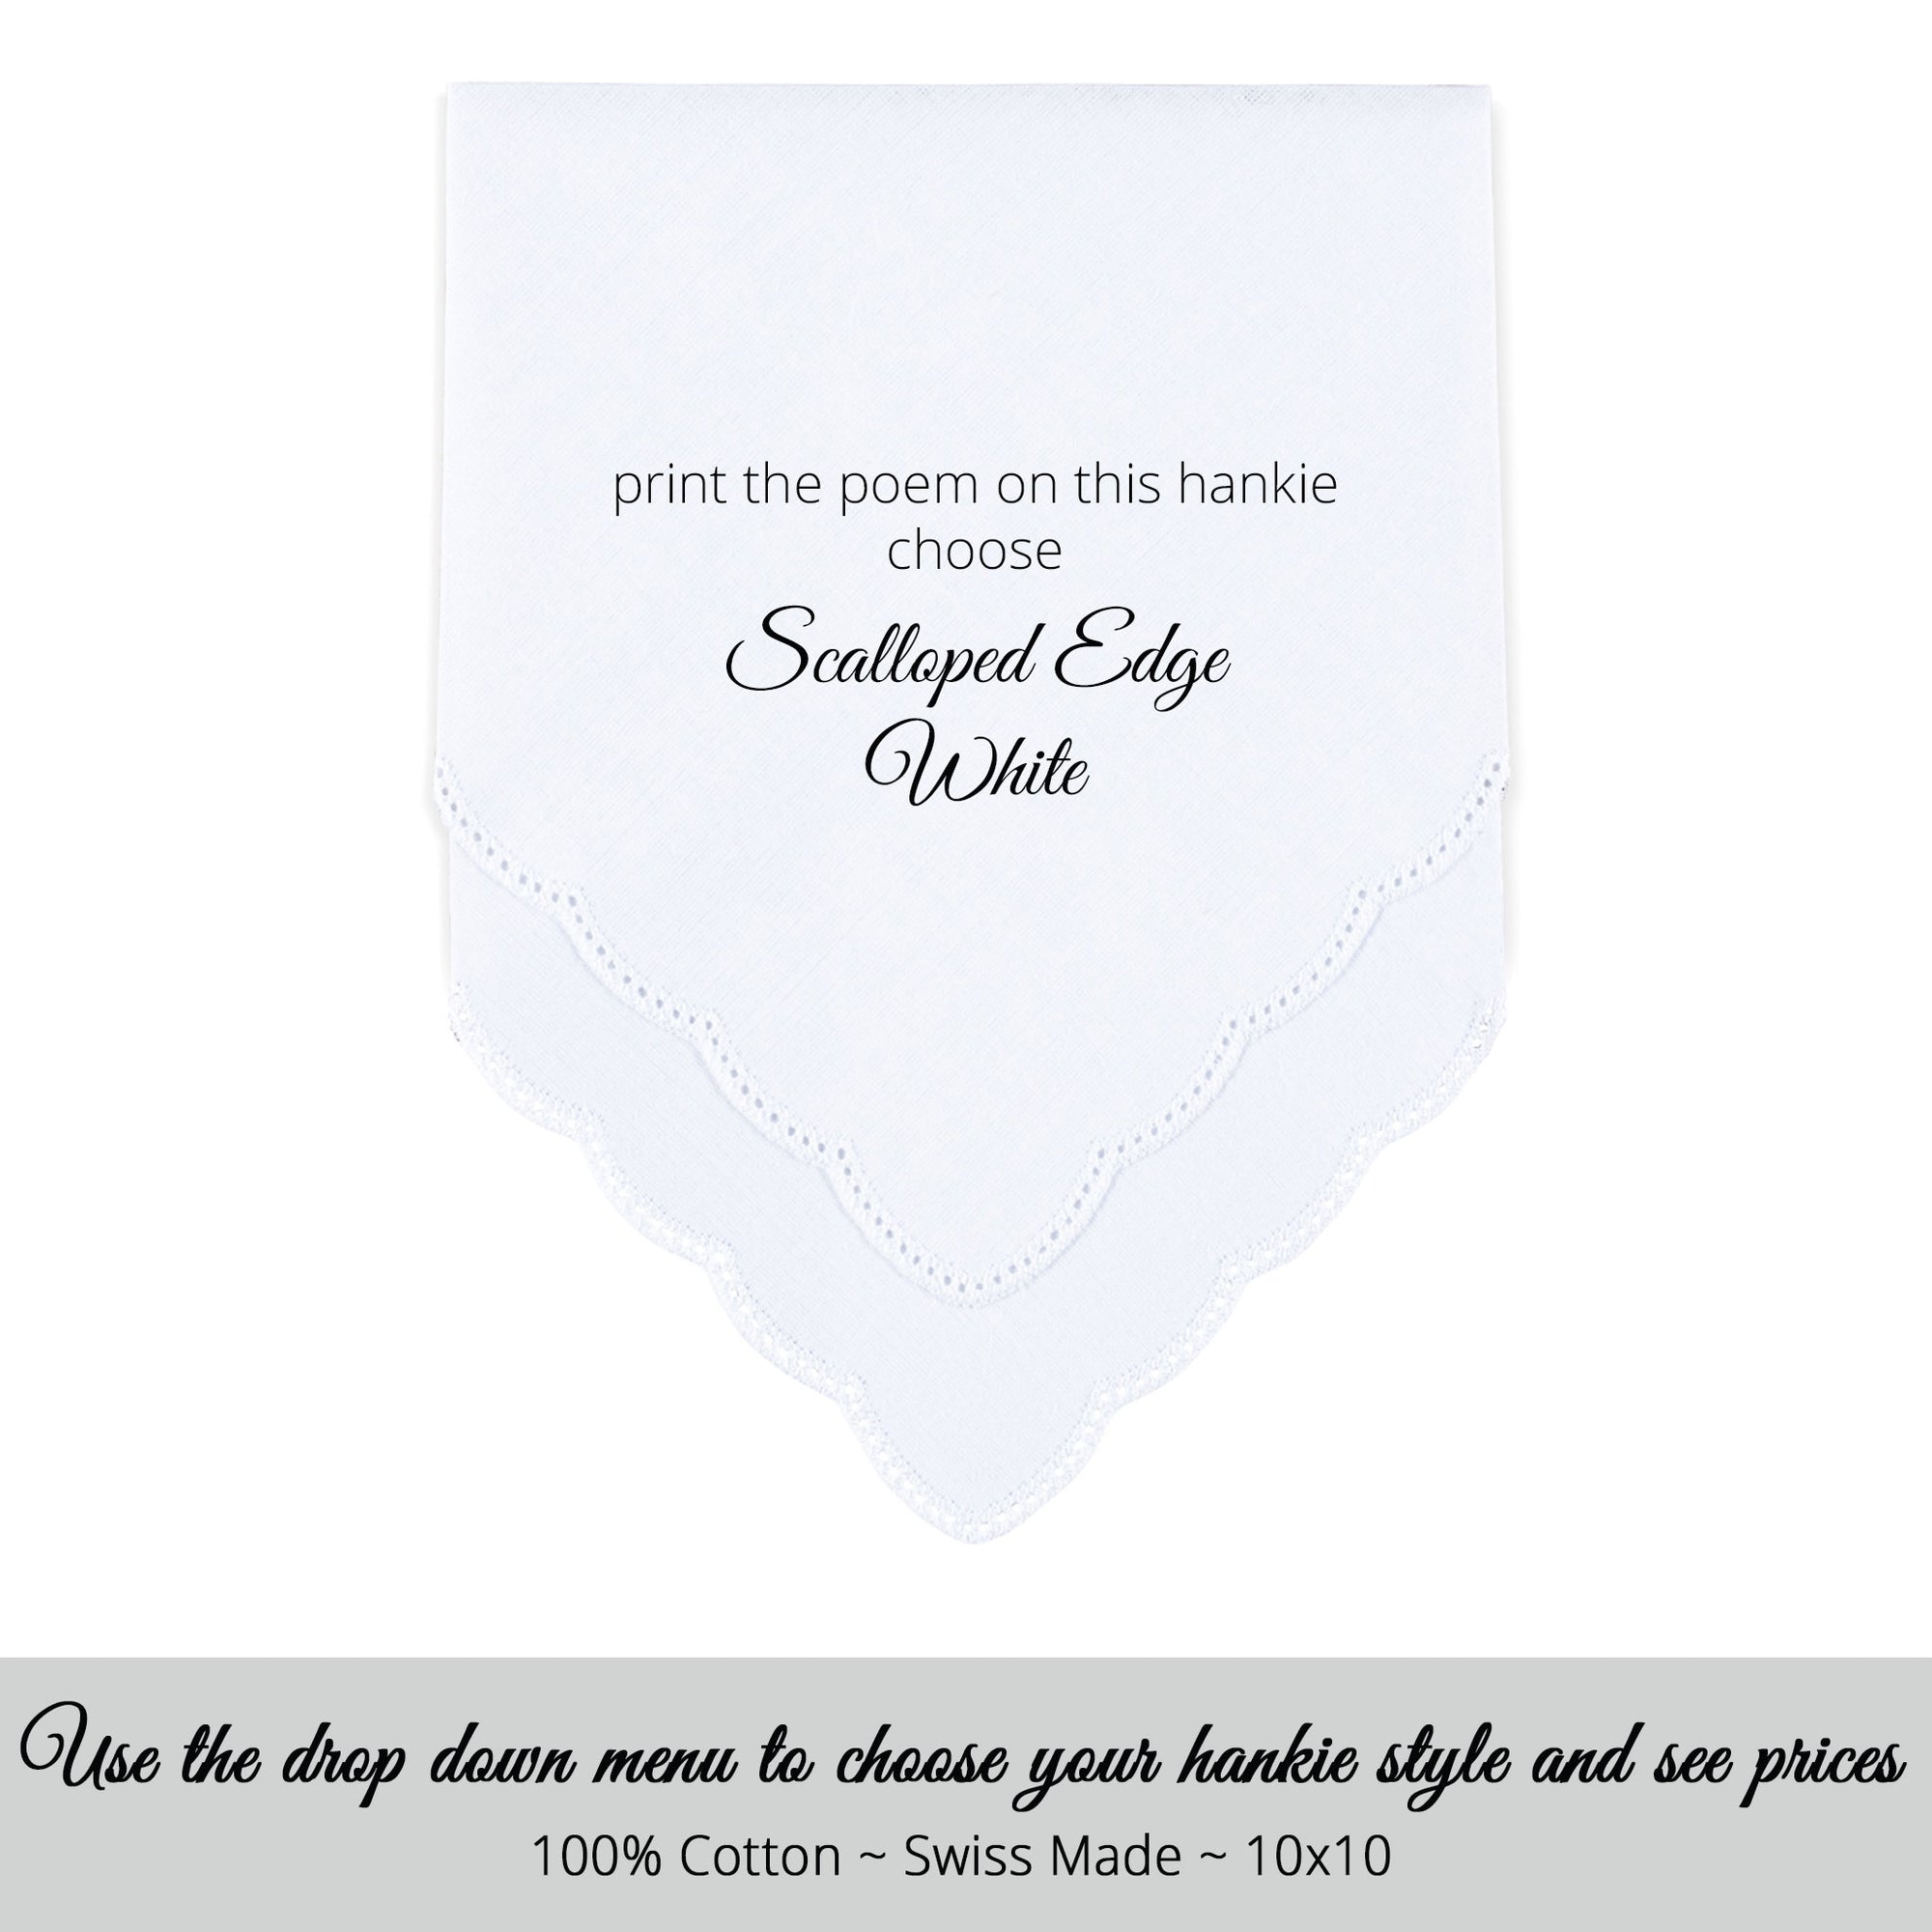 Poem Printed Gay Wedding Hankie from the Grooms to the Ring Bearer "For The Day You Wed"